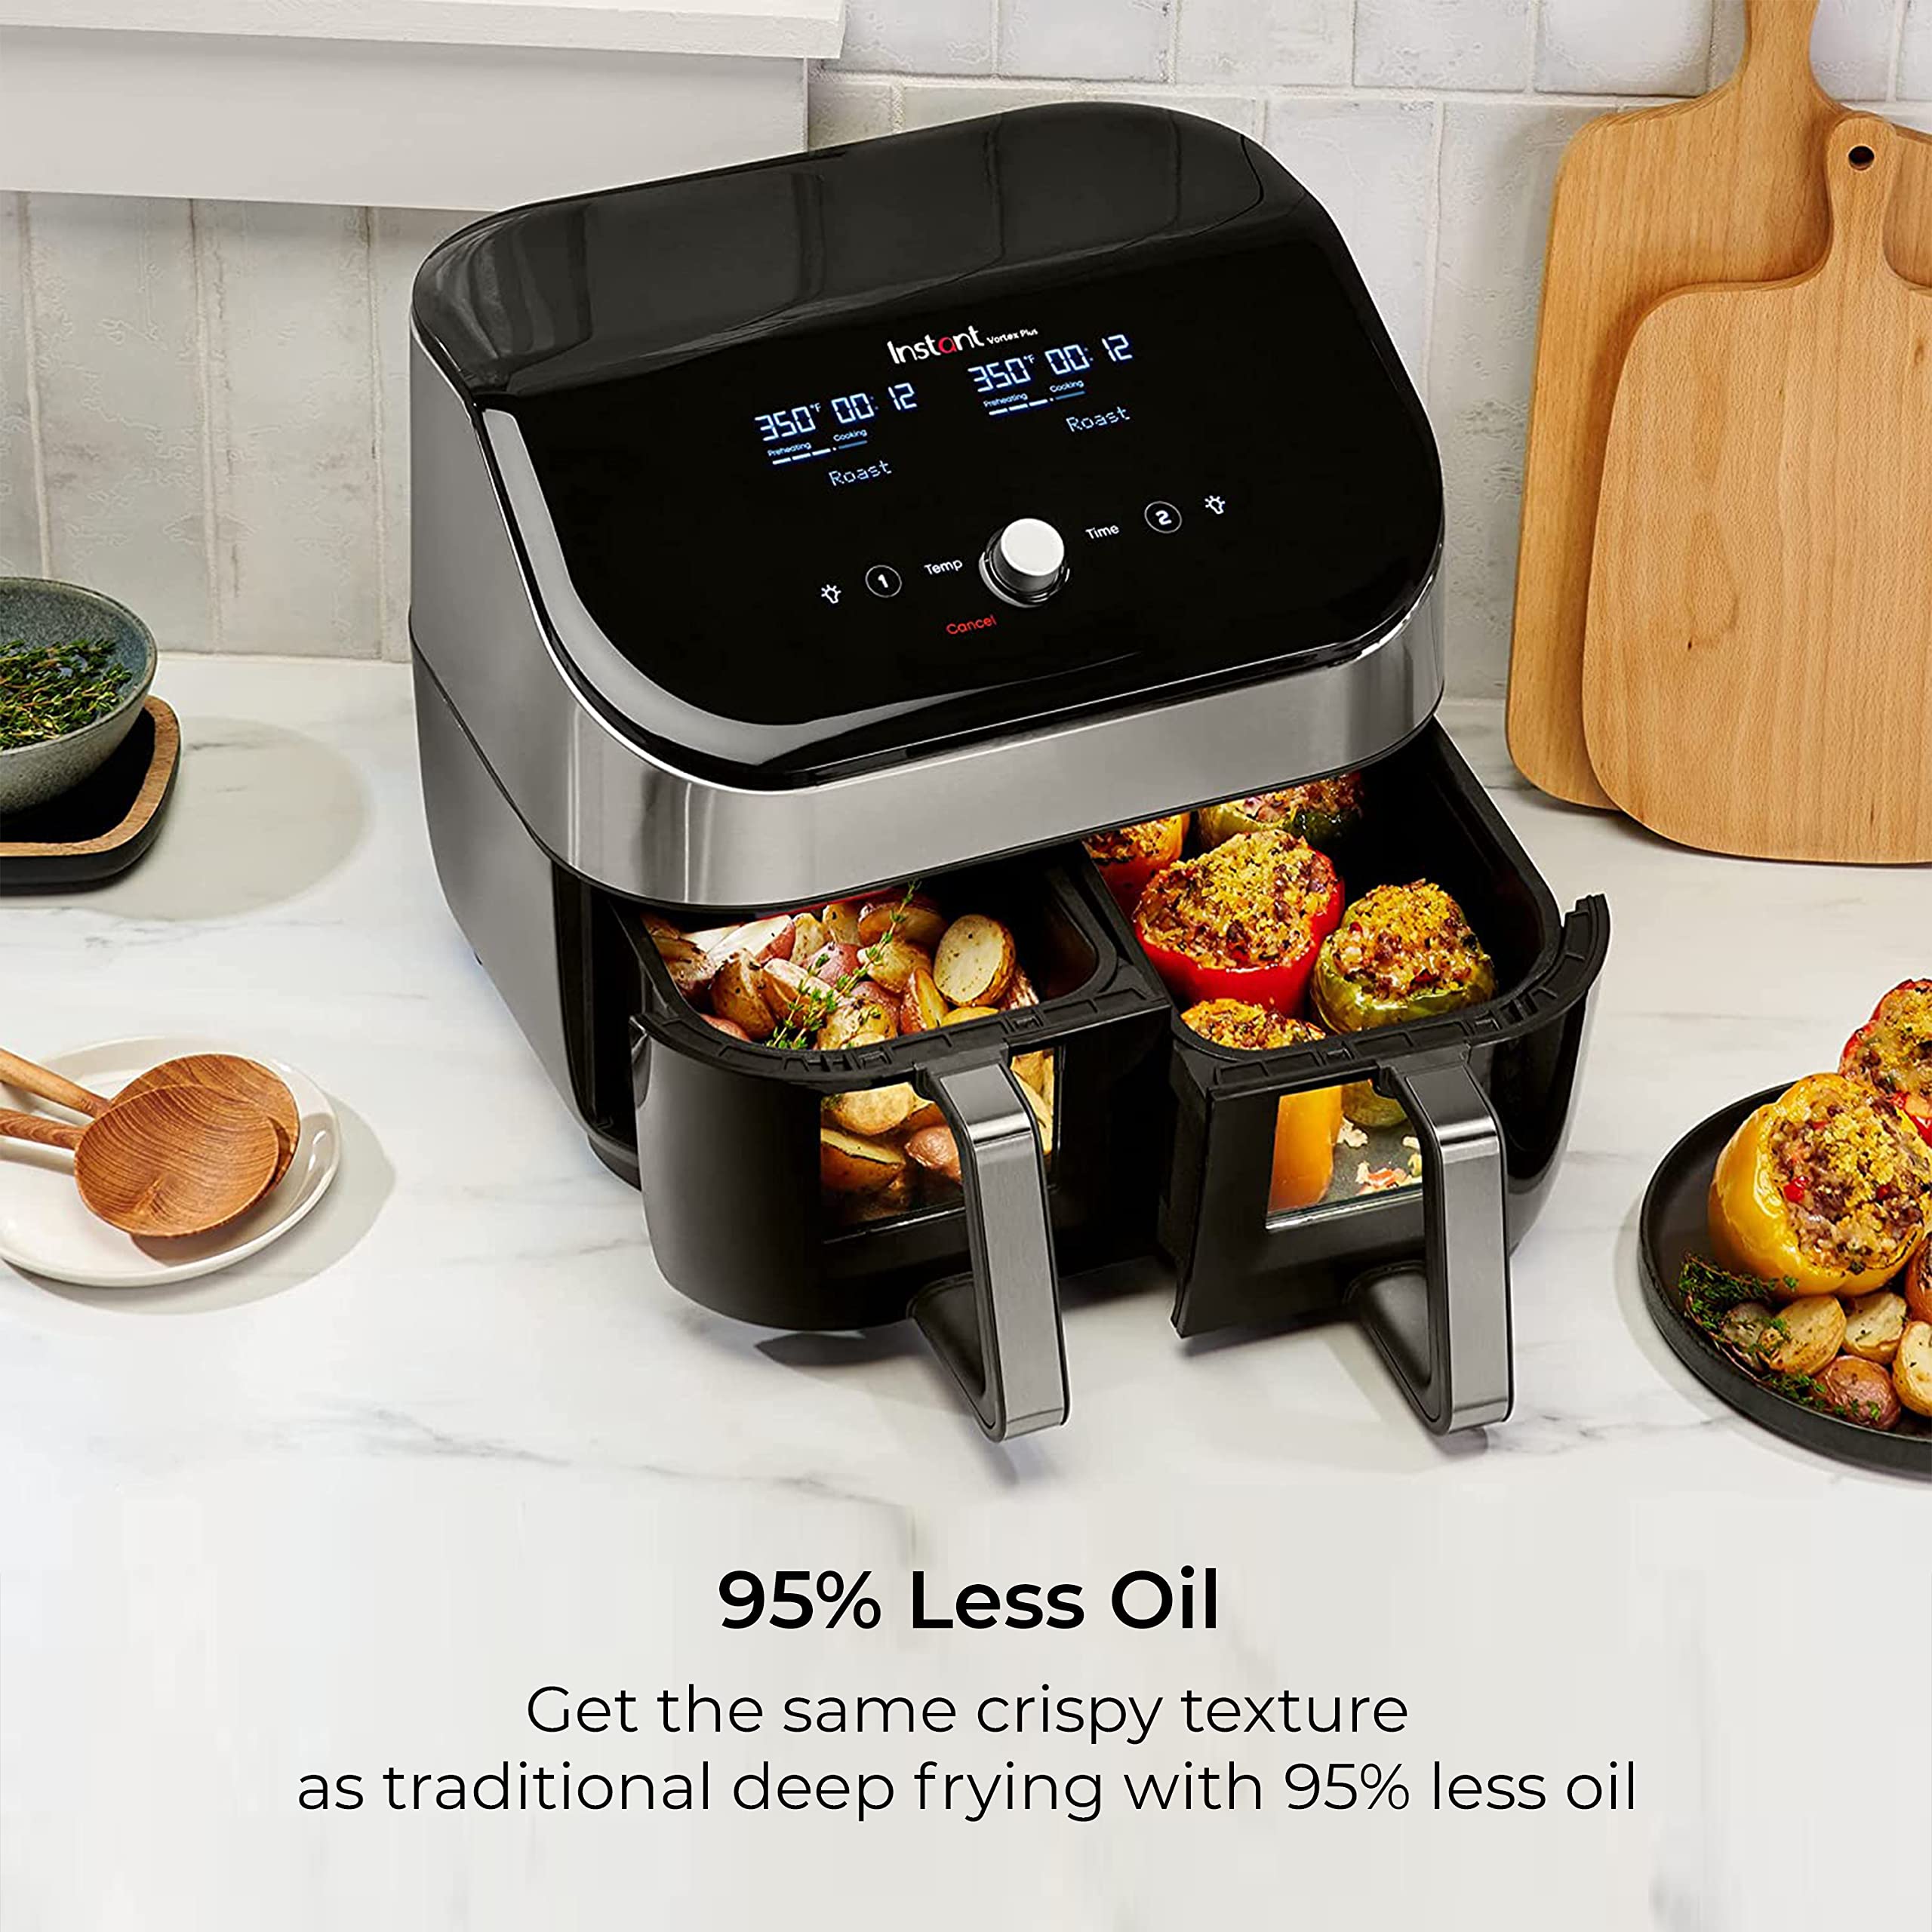 Instant Vortex Plus XL 8QT ClearCook Air Fryer, Clear Windows & Custom Program Options, 8-in-1 Functions that Crisps, Broils, Roasts, Dehydrates, Bakes, Reheats, from the Makers of Instant Pot, Black